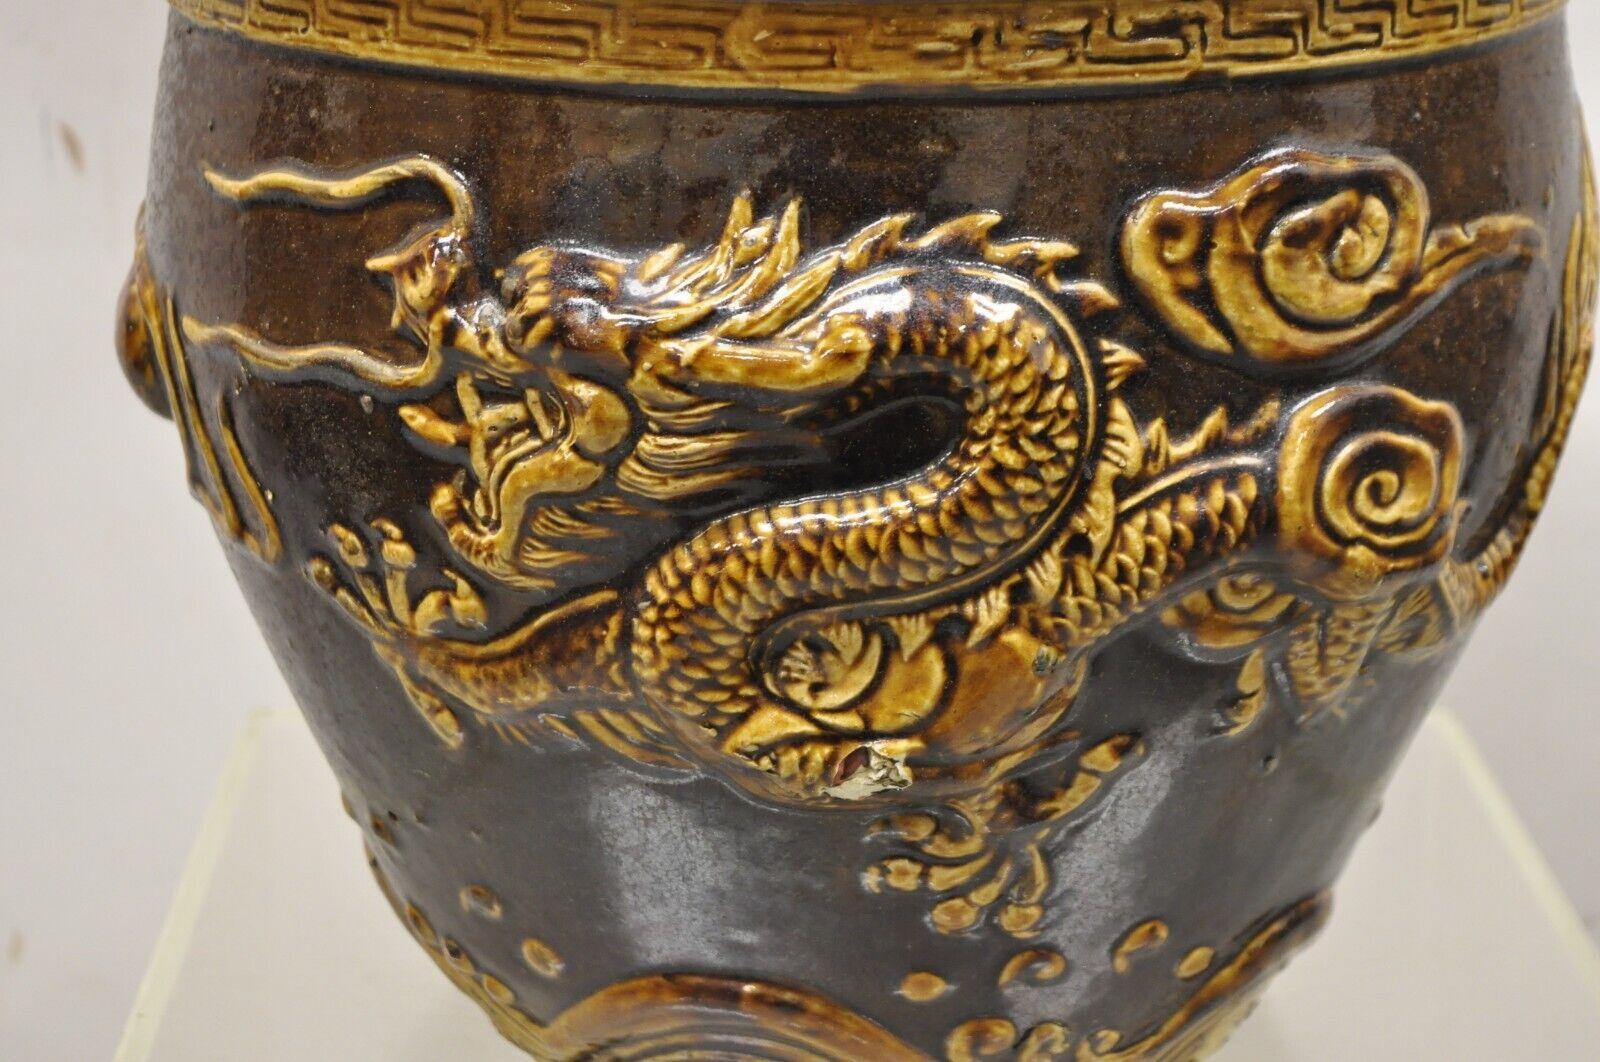 Chinese Export Vintage Chinese Brown Glazed Ceramic Dragon Cachepot Planter Pot - a Pair For Sale